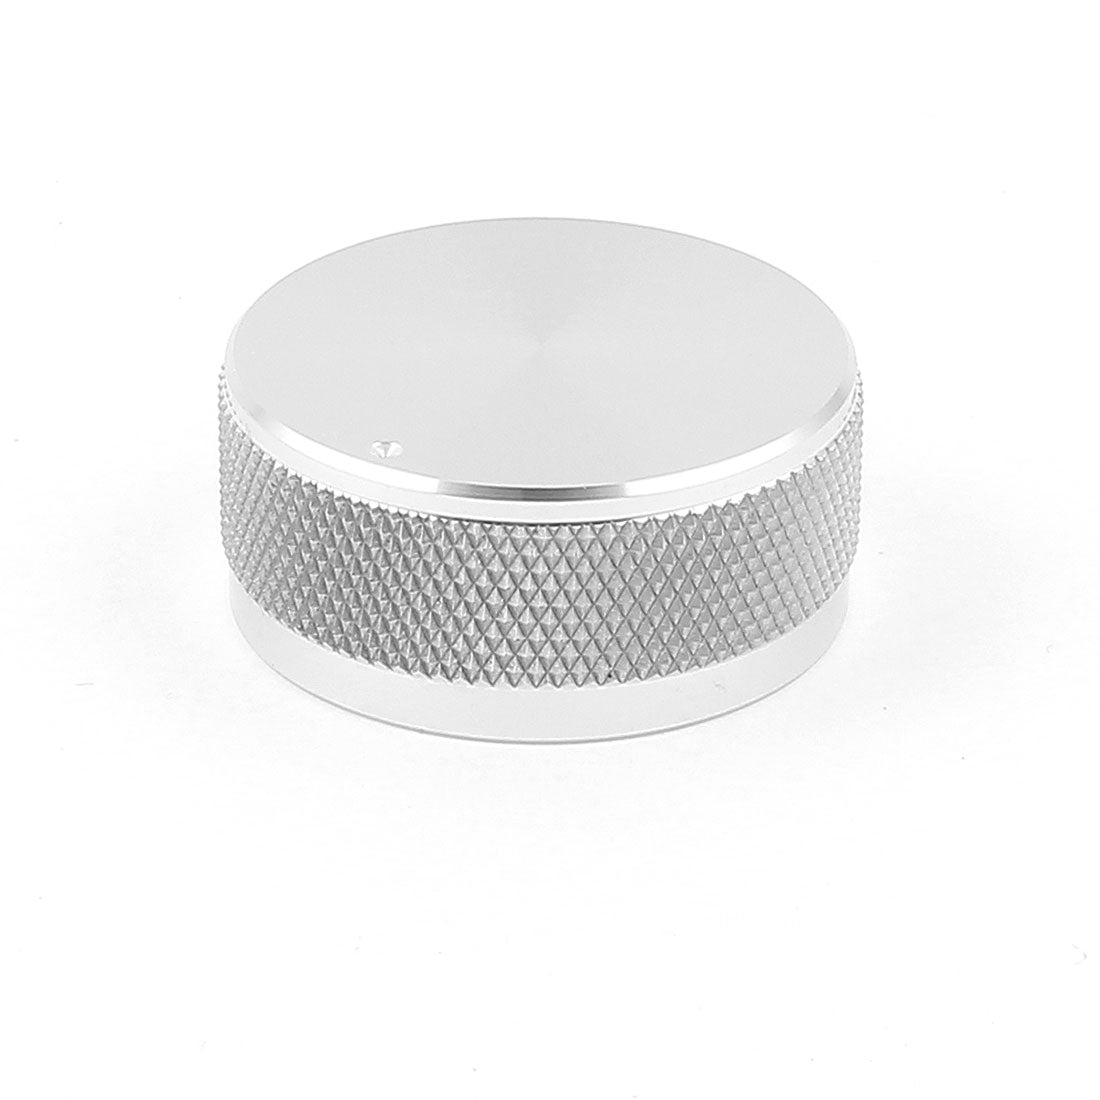 uxcell Uxcell Silver Tone CNC Solid Aluminum Hifi Speaker Radio Volume Control Knobs 35x16mm